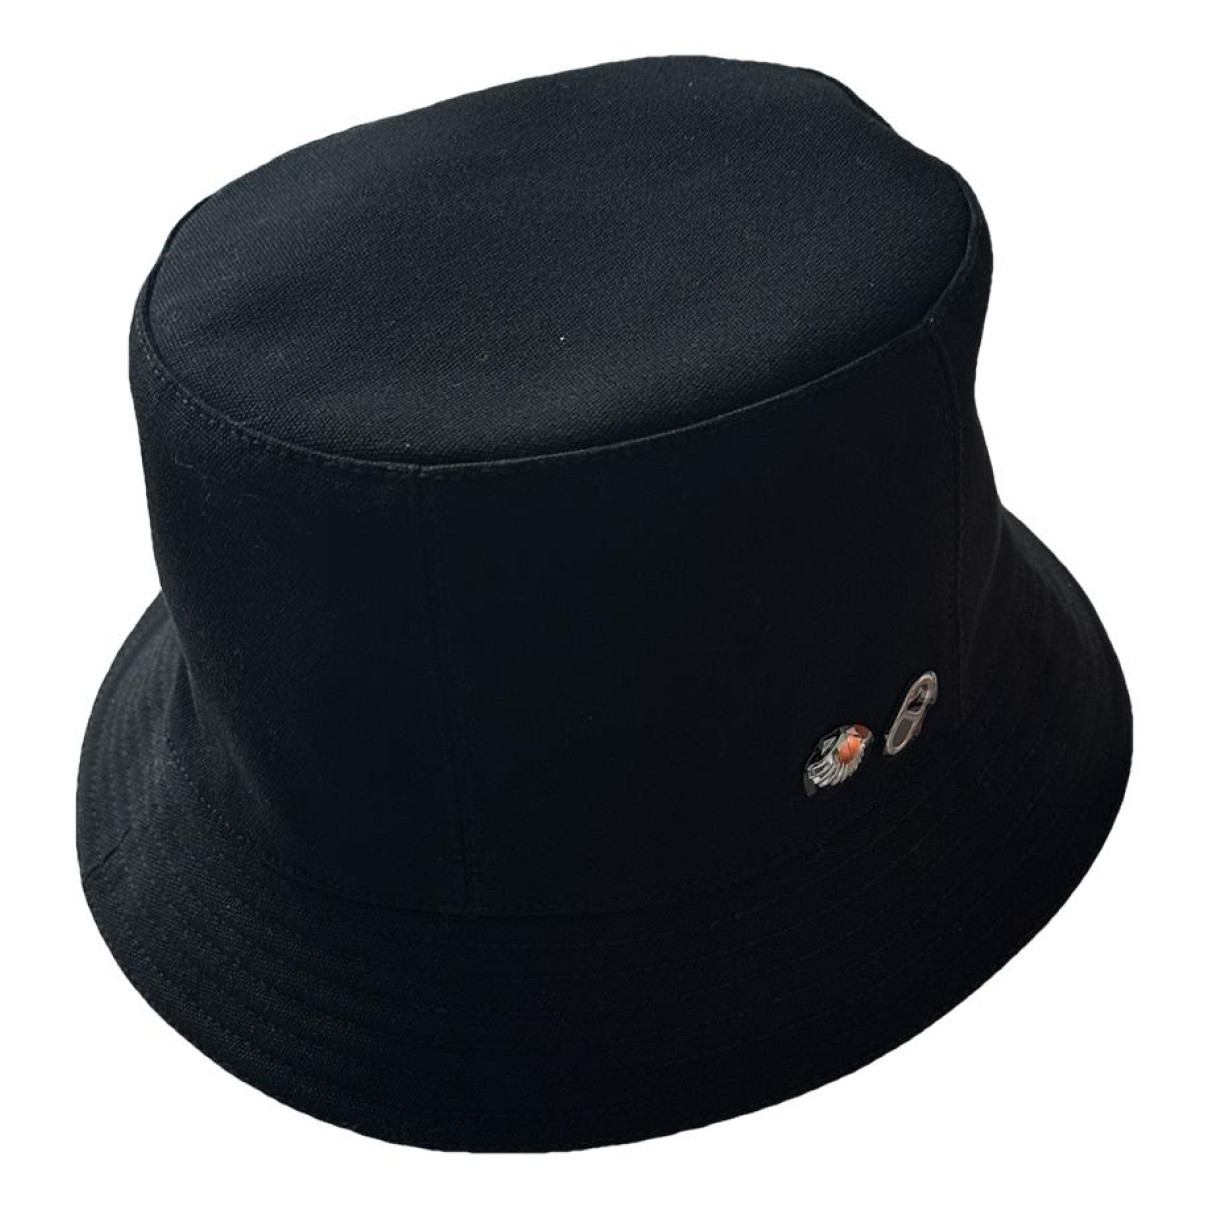 accessories Hermès hats for Female Cotton 58 cm. Used condition